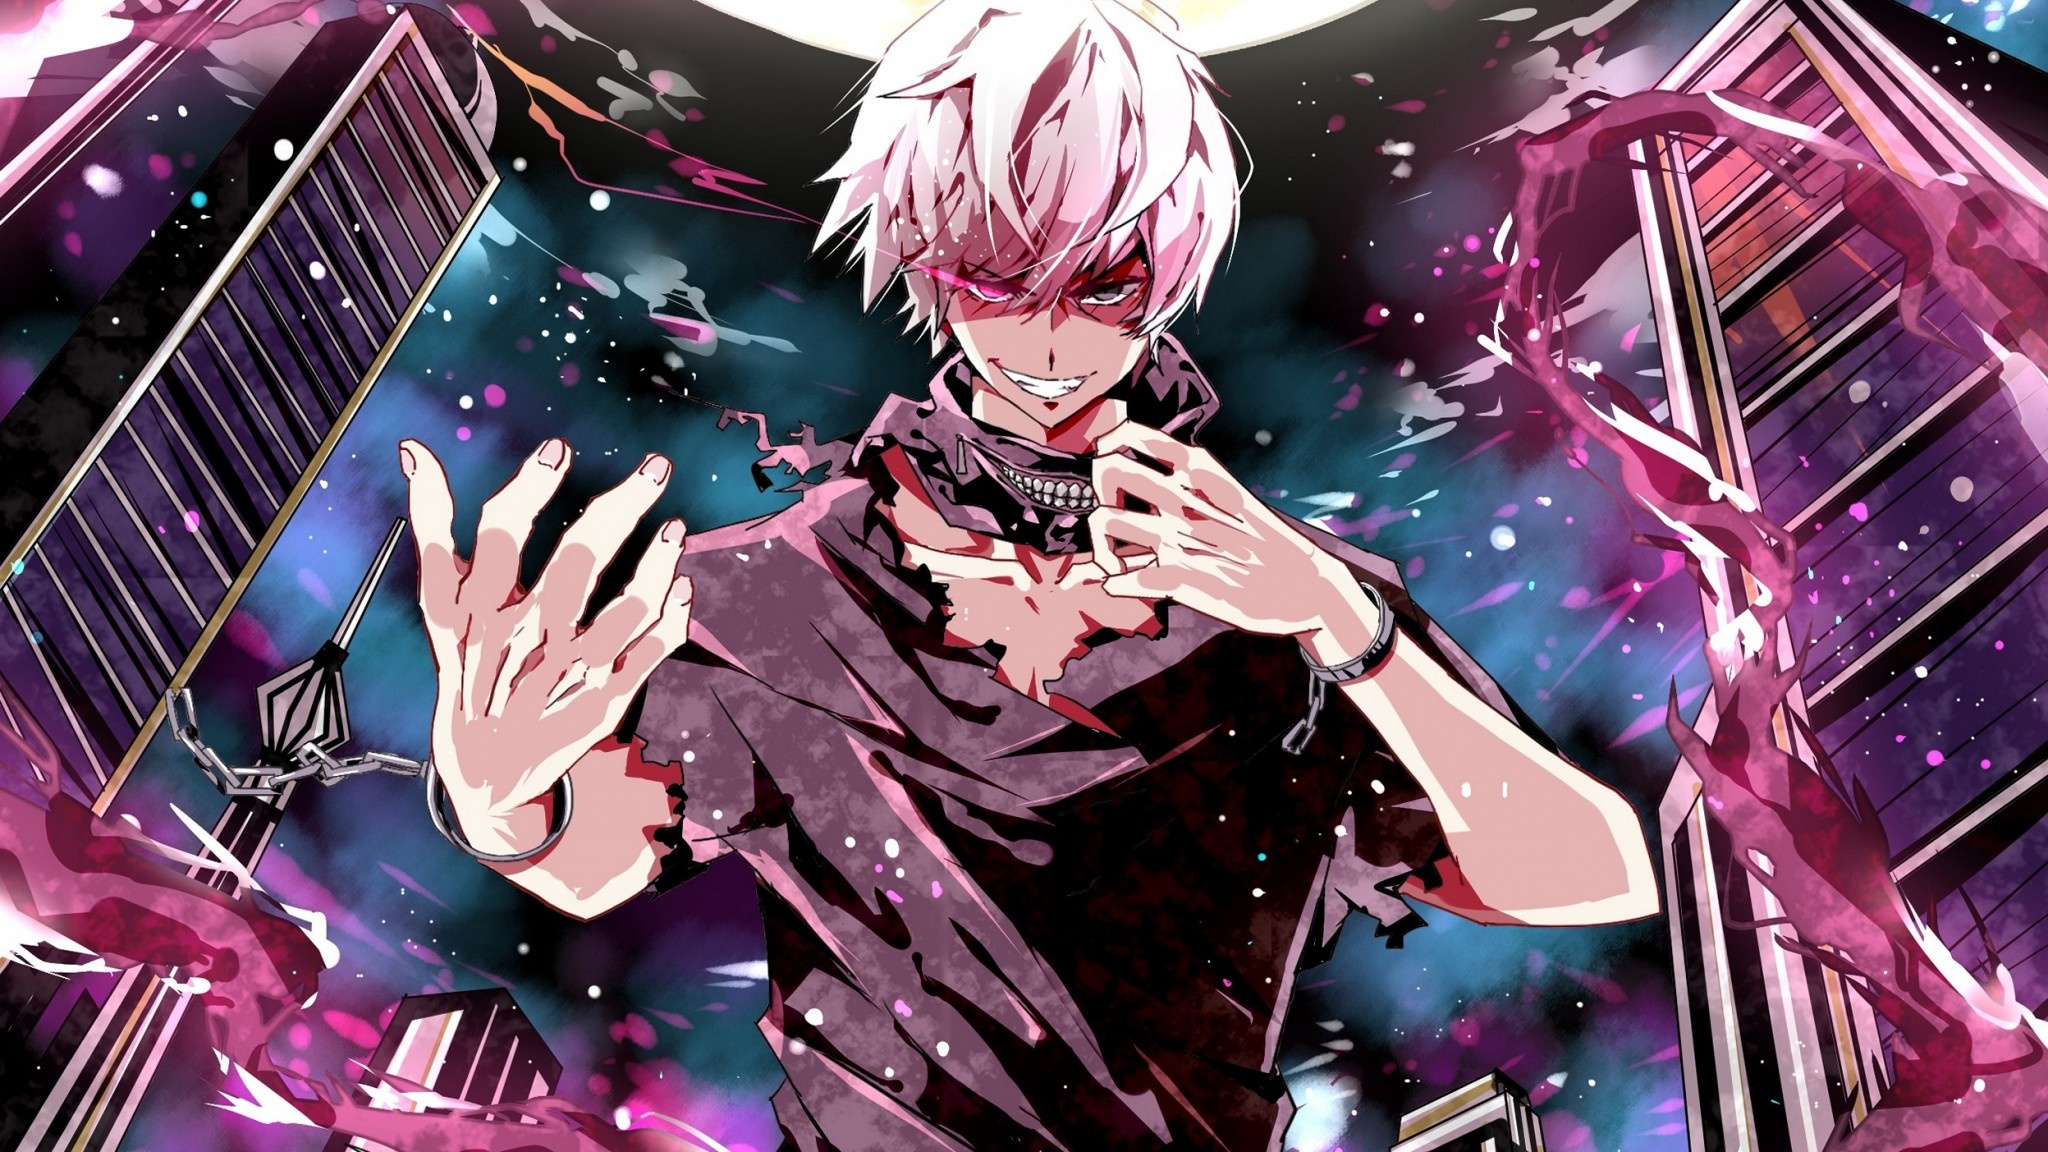 Download Tokyo Ghoul Good Anime Wolf Wallpaper In Many Resolutions